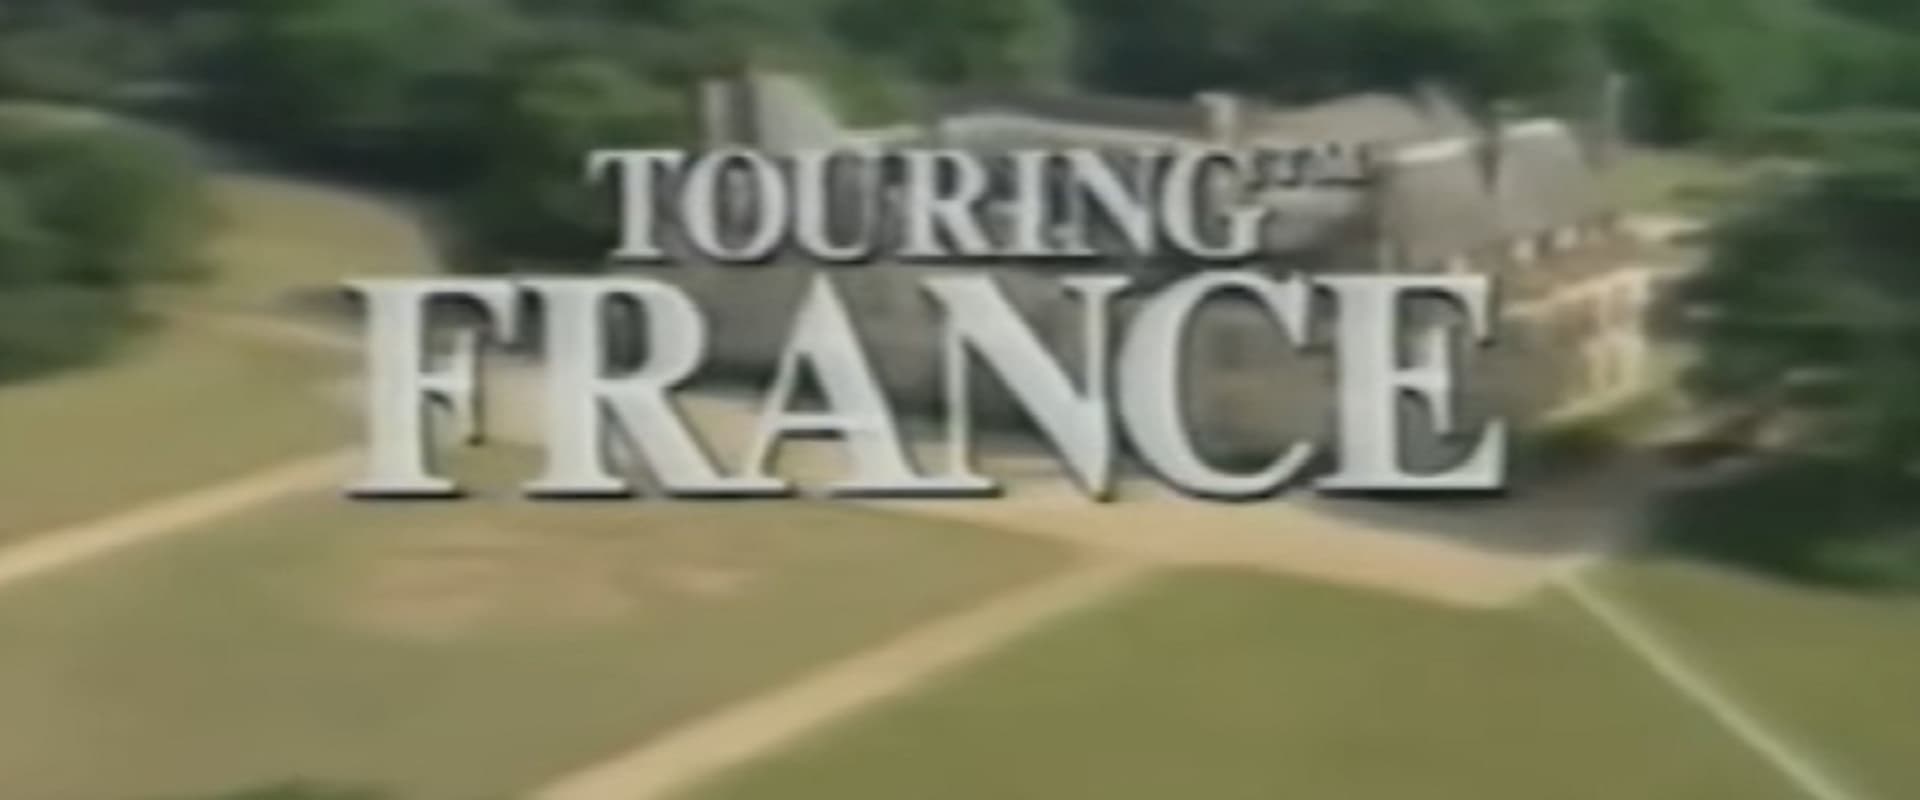 Touring France